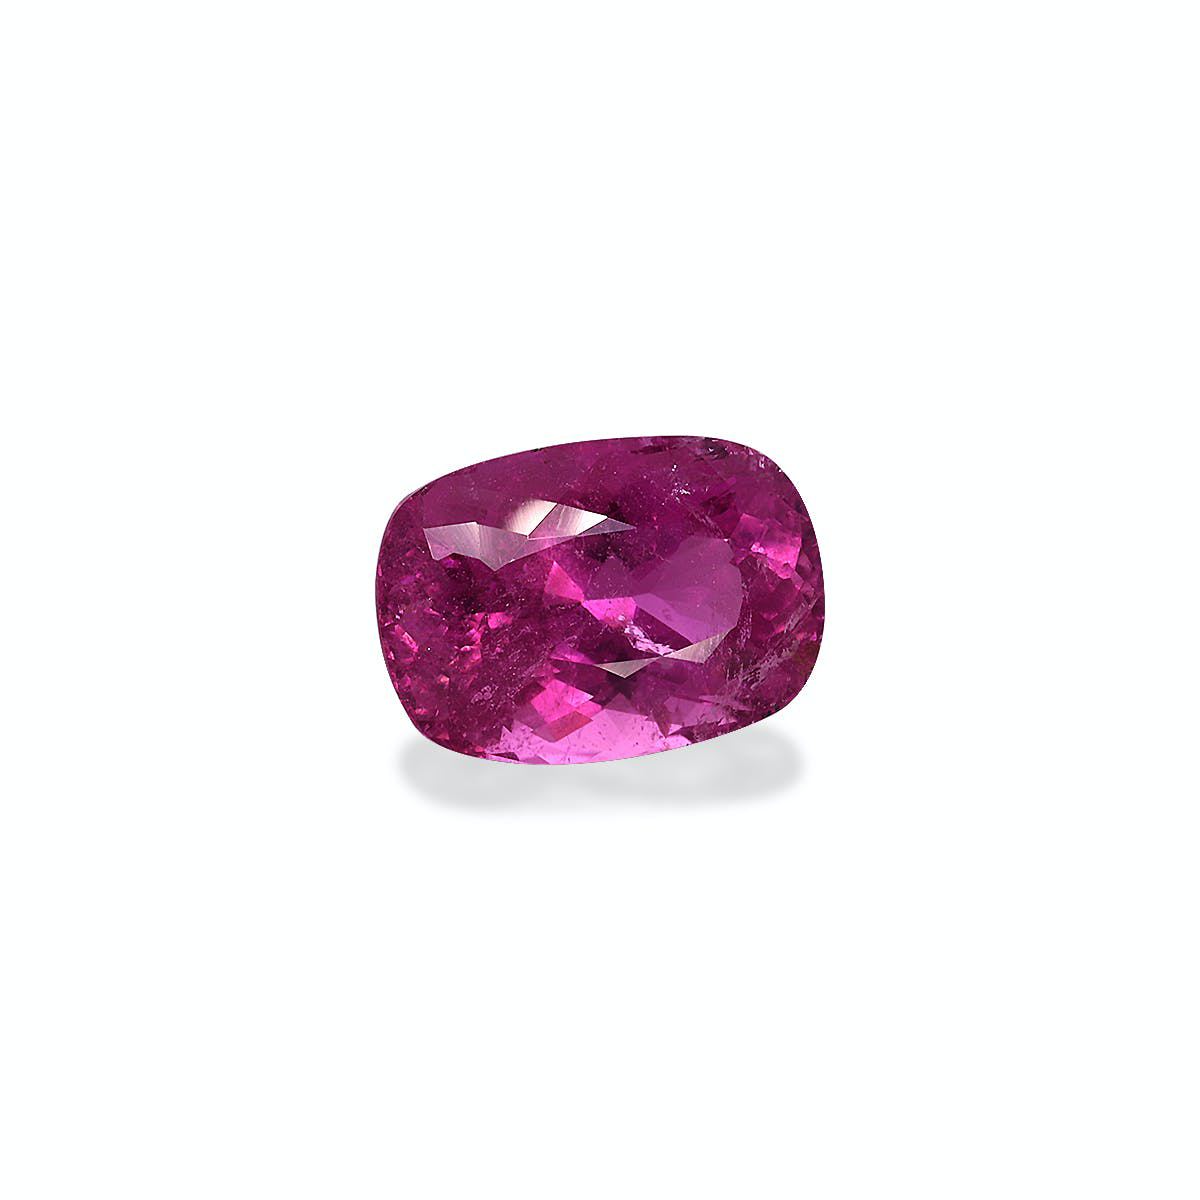 Picture of Flower Pink Rubellite Tourmaline 9.35ct (RL0751)